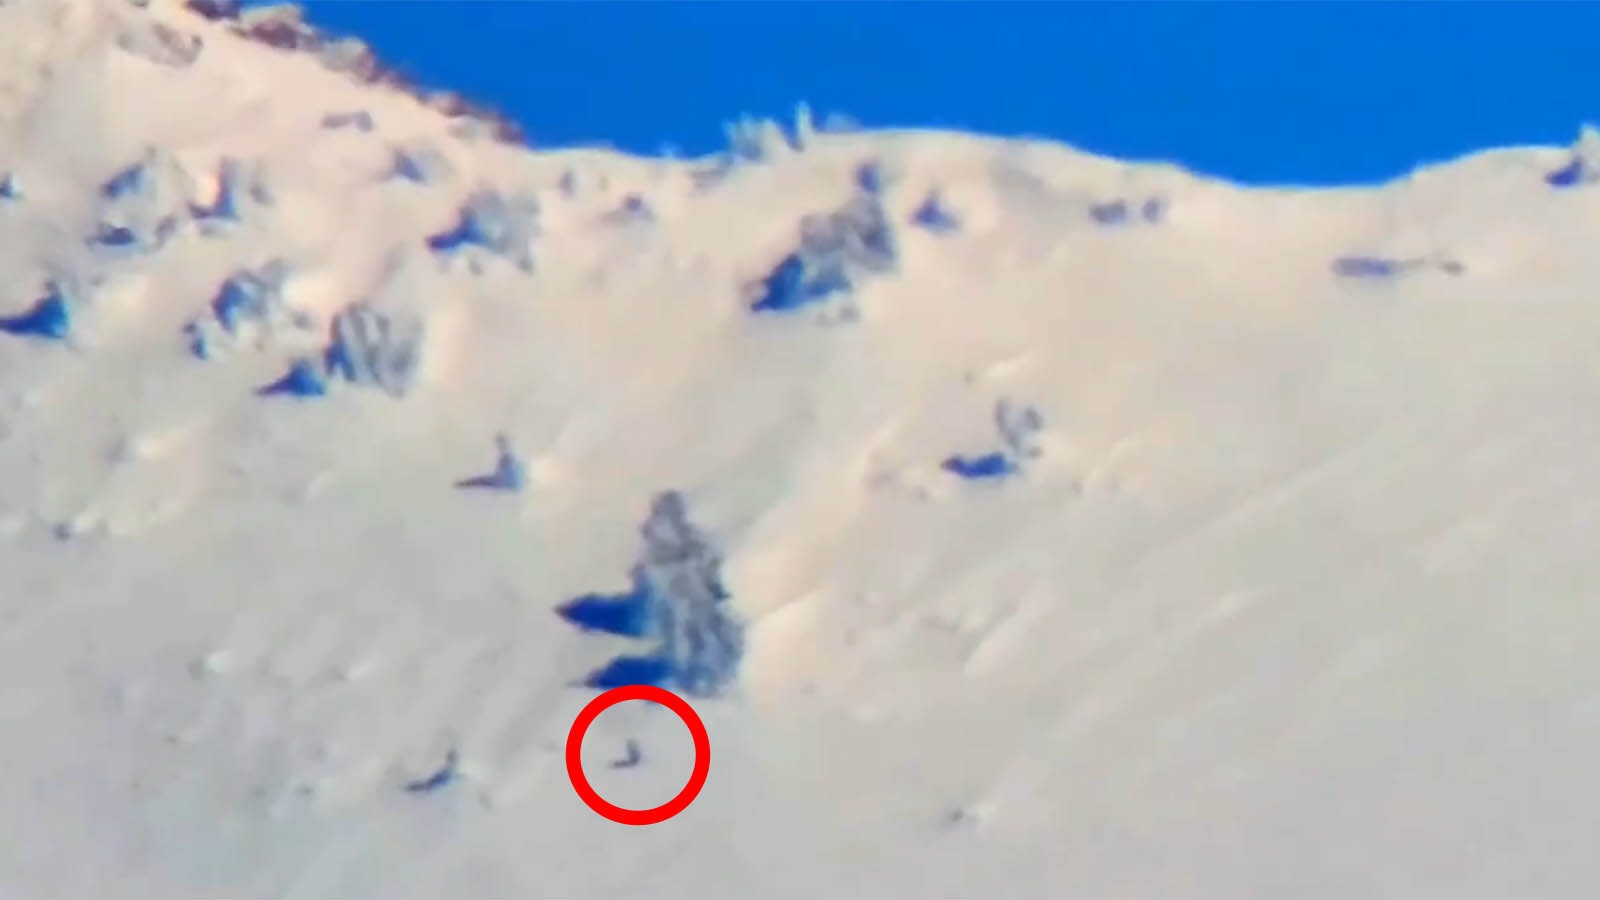 In a long-range, shaky and blurry video, a figure that appears to be on two legs sprints across a steep snowy slope in Utah.